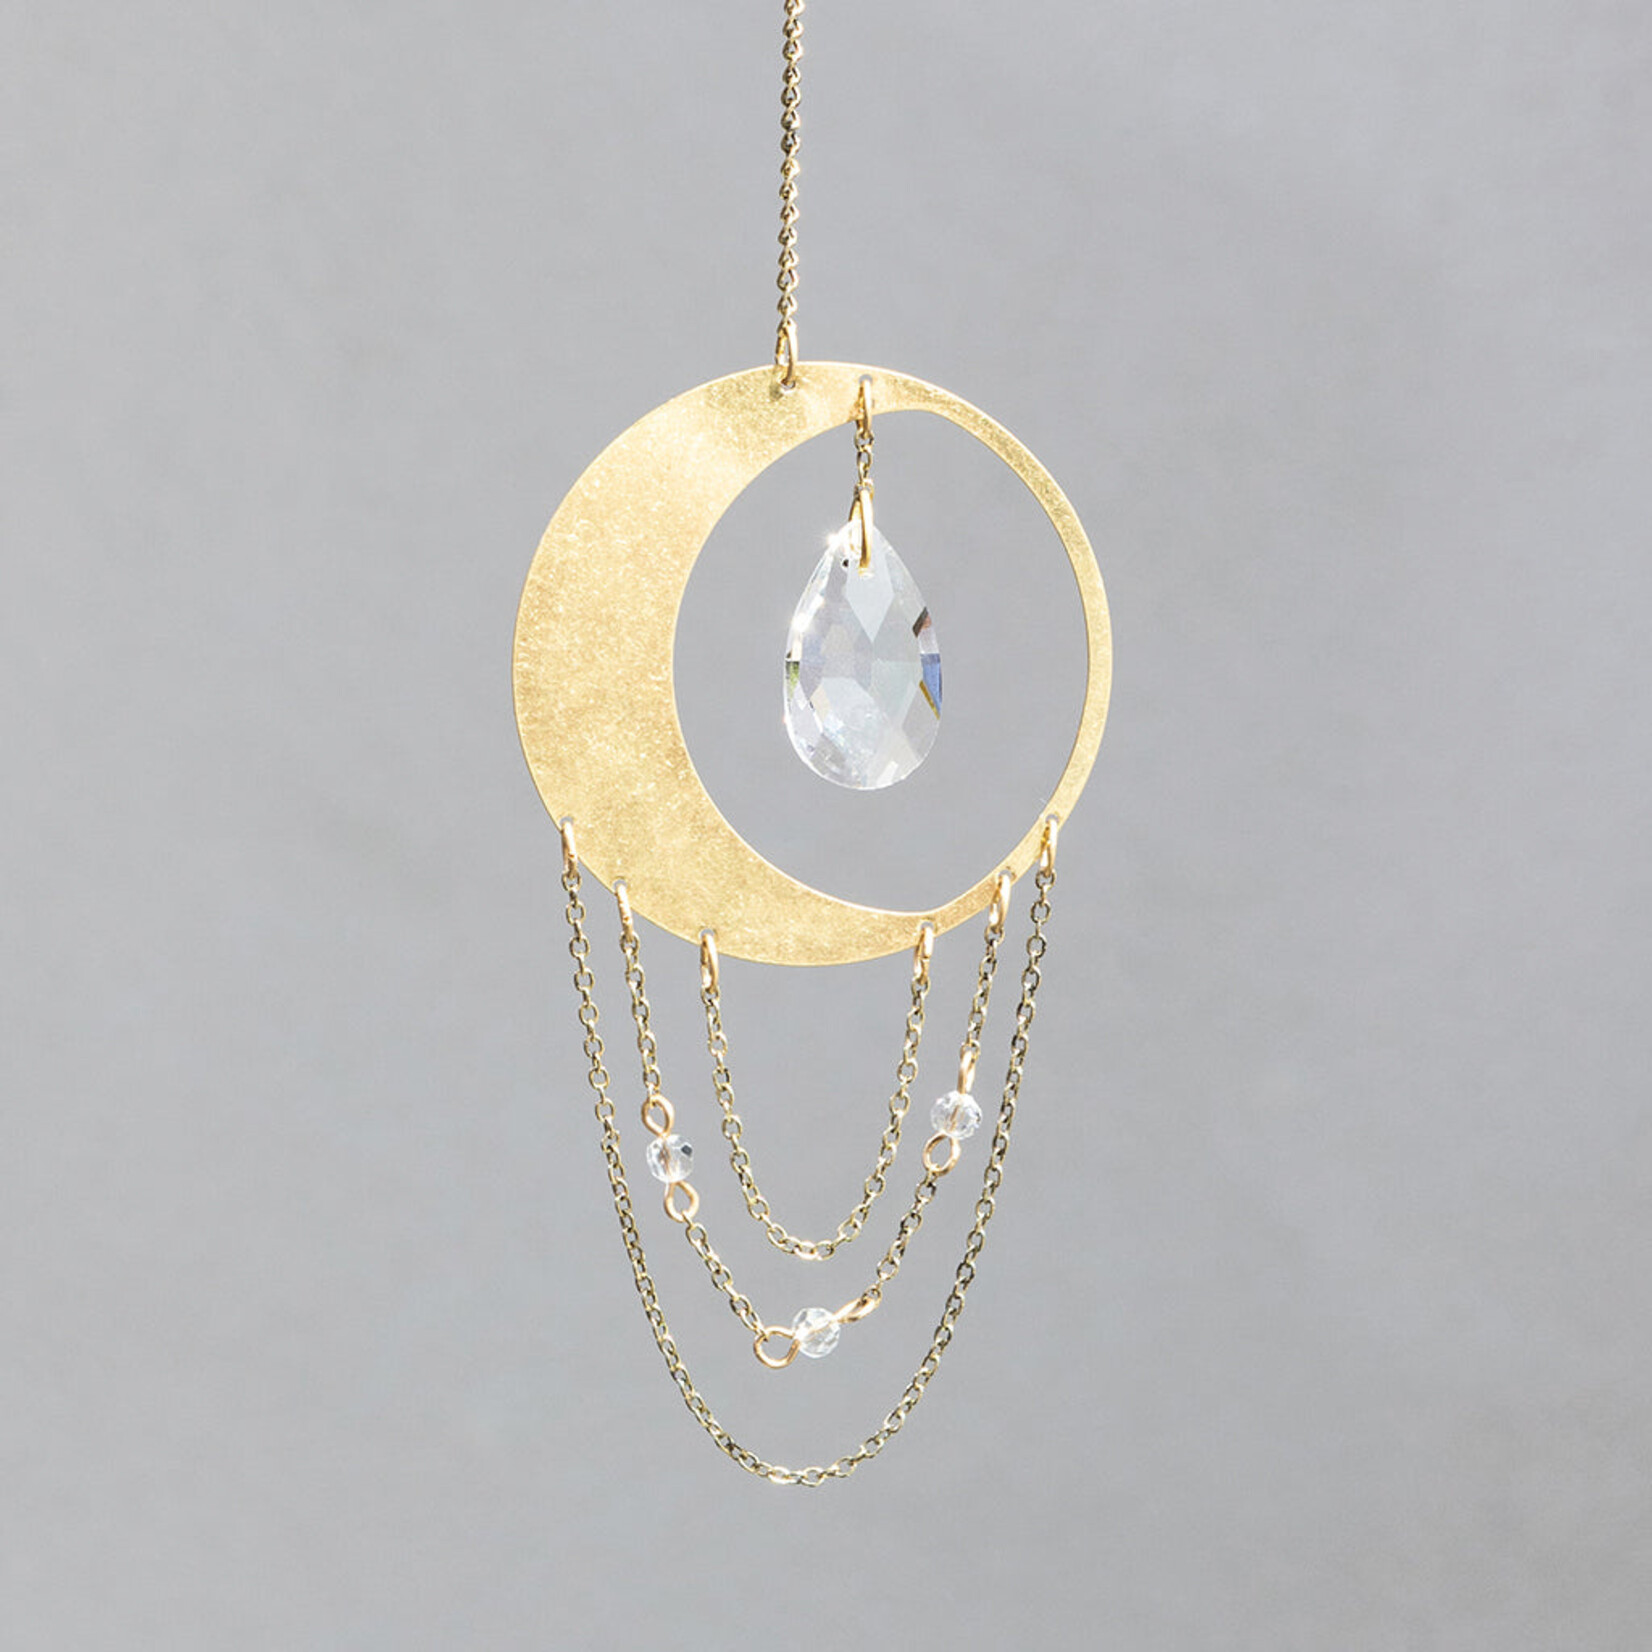 Scout Curated Wears Scout Curated Wears - Mini Suncatcher - Crescent Moon/Balance